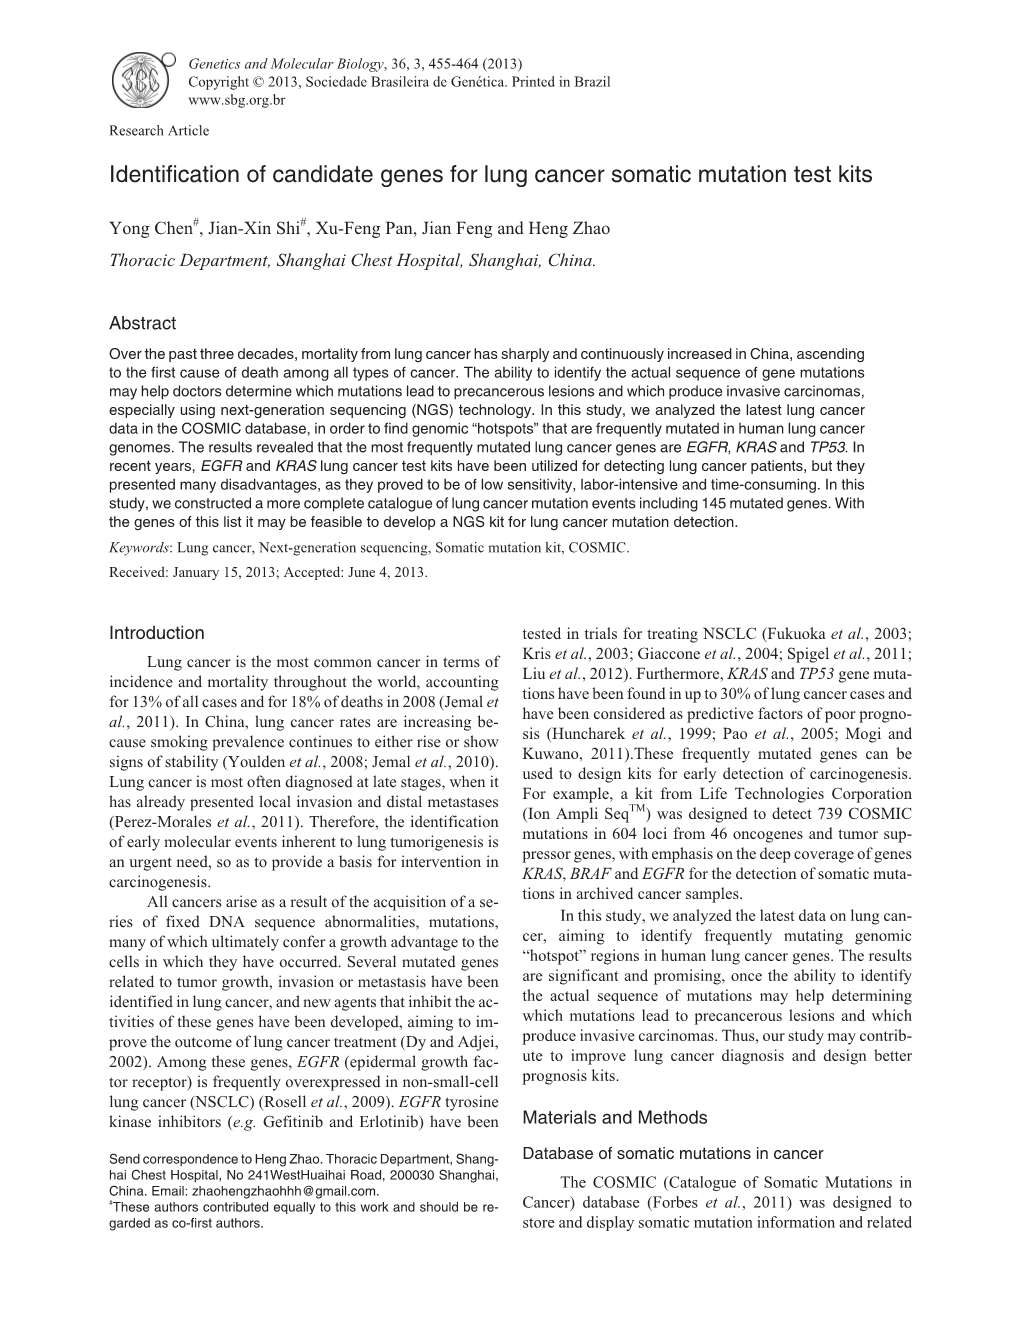 Identification of Candidate Genes for Lung Cancer Somatic Mutation Test Kits